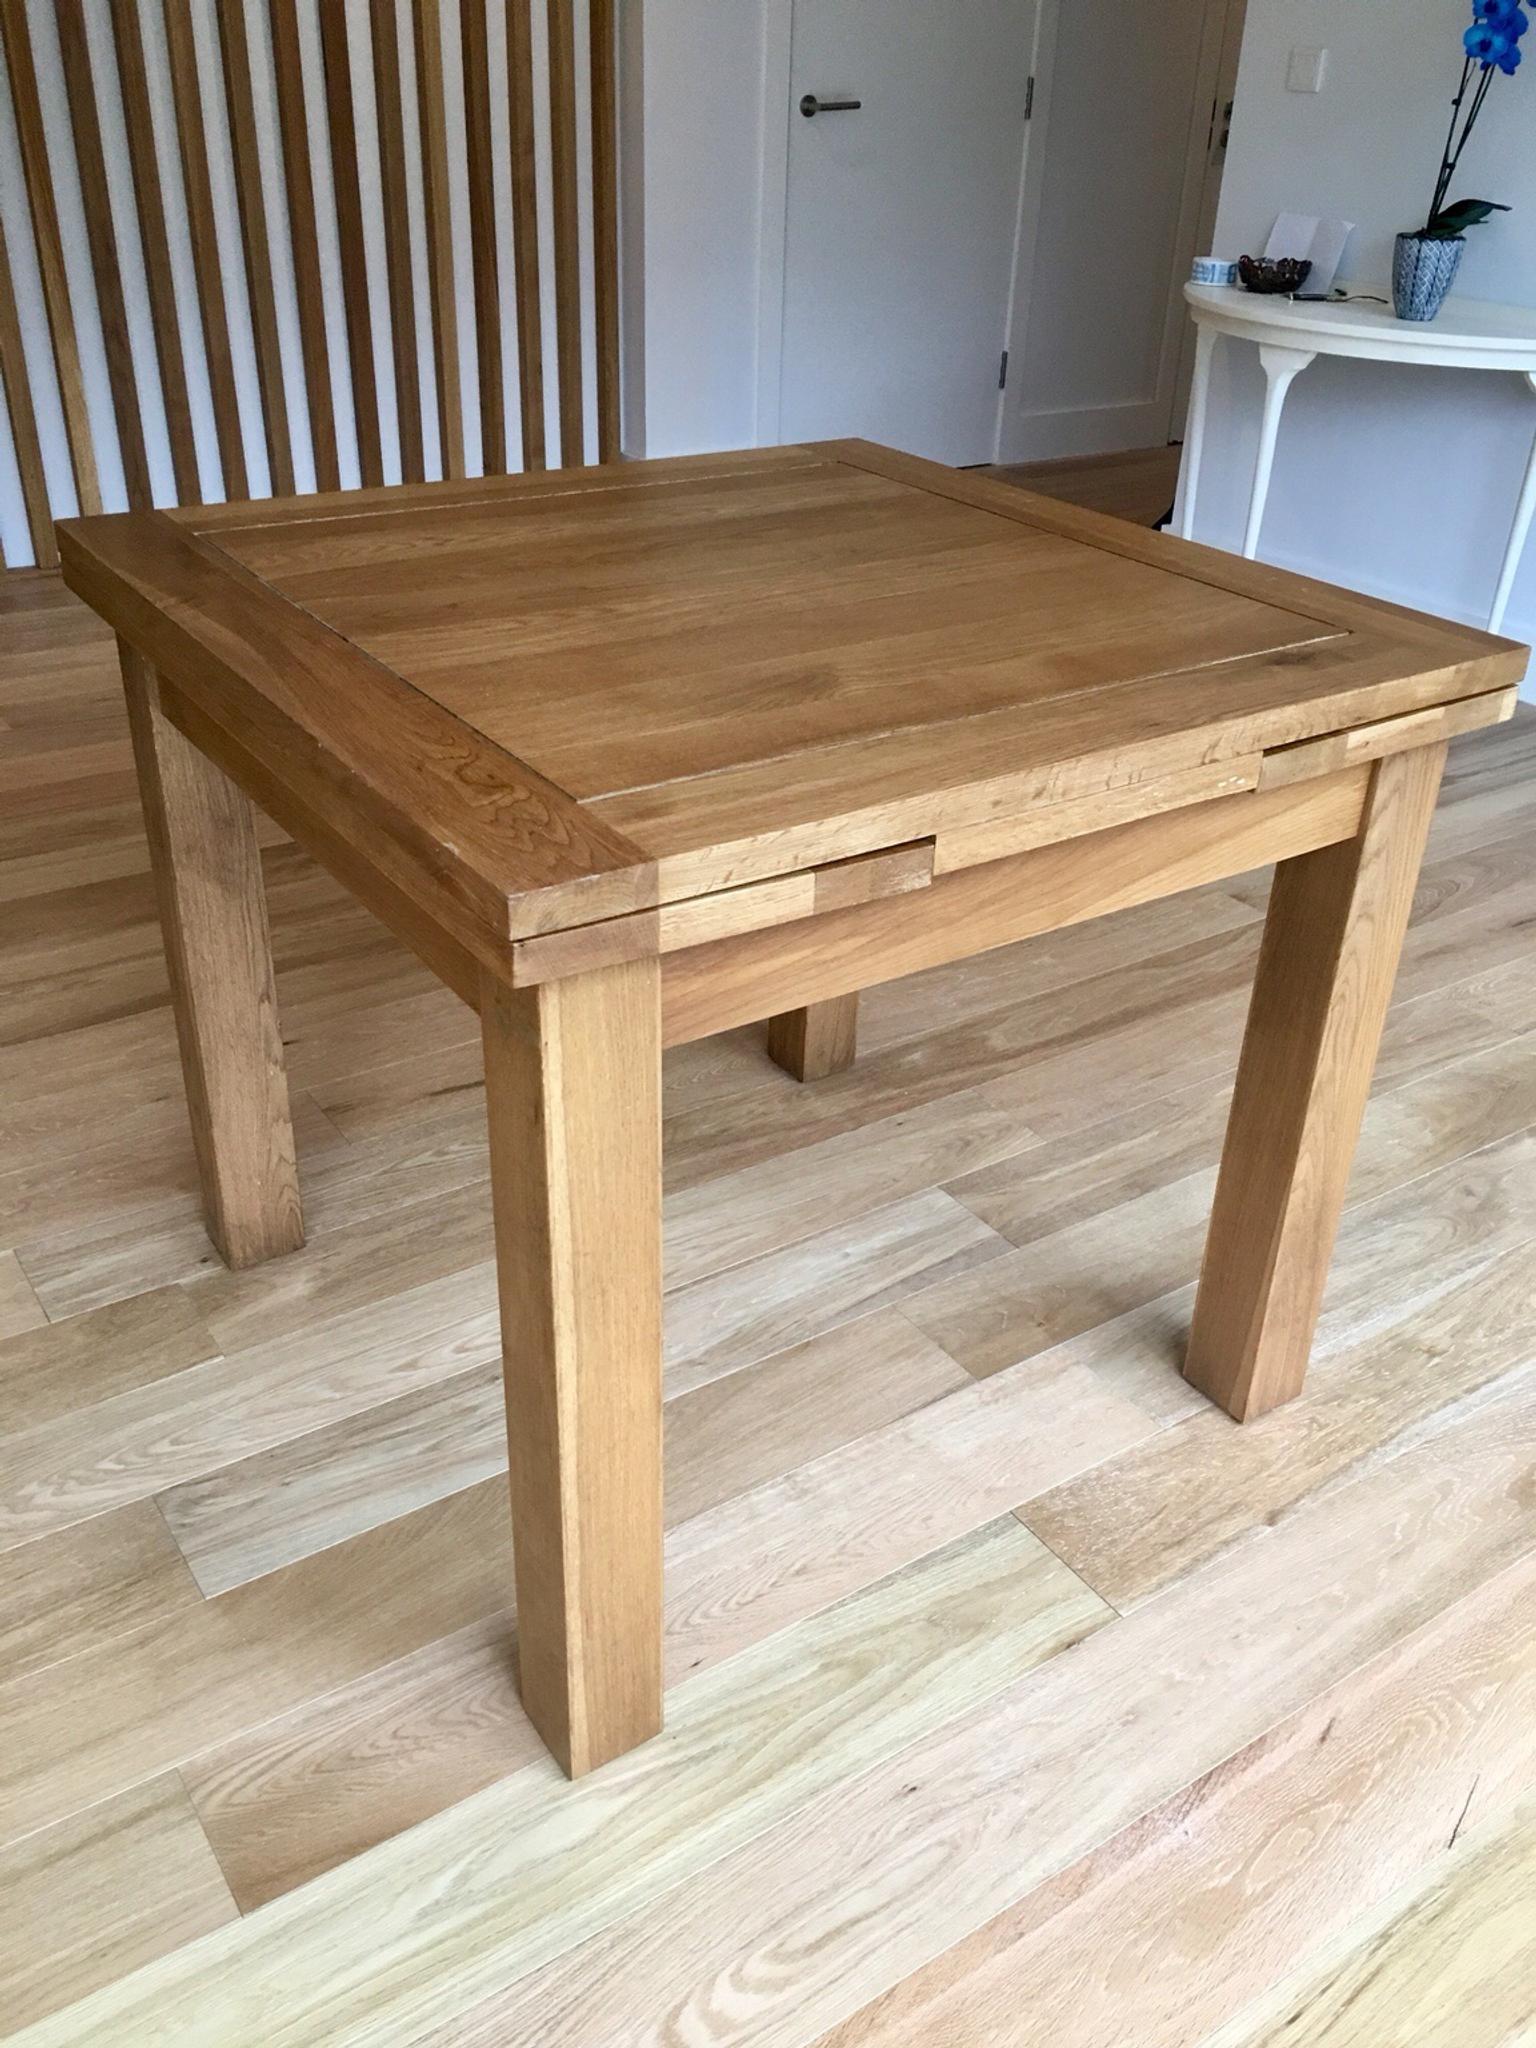 3ft X 3ft Natural Oak Extending Dining Table In So21 Winchester